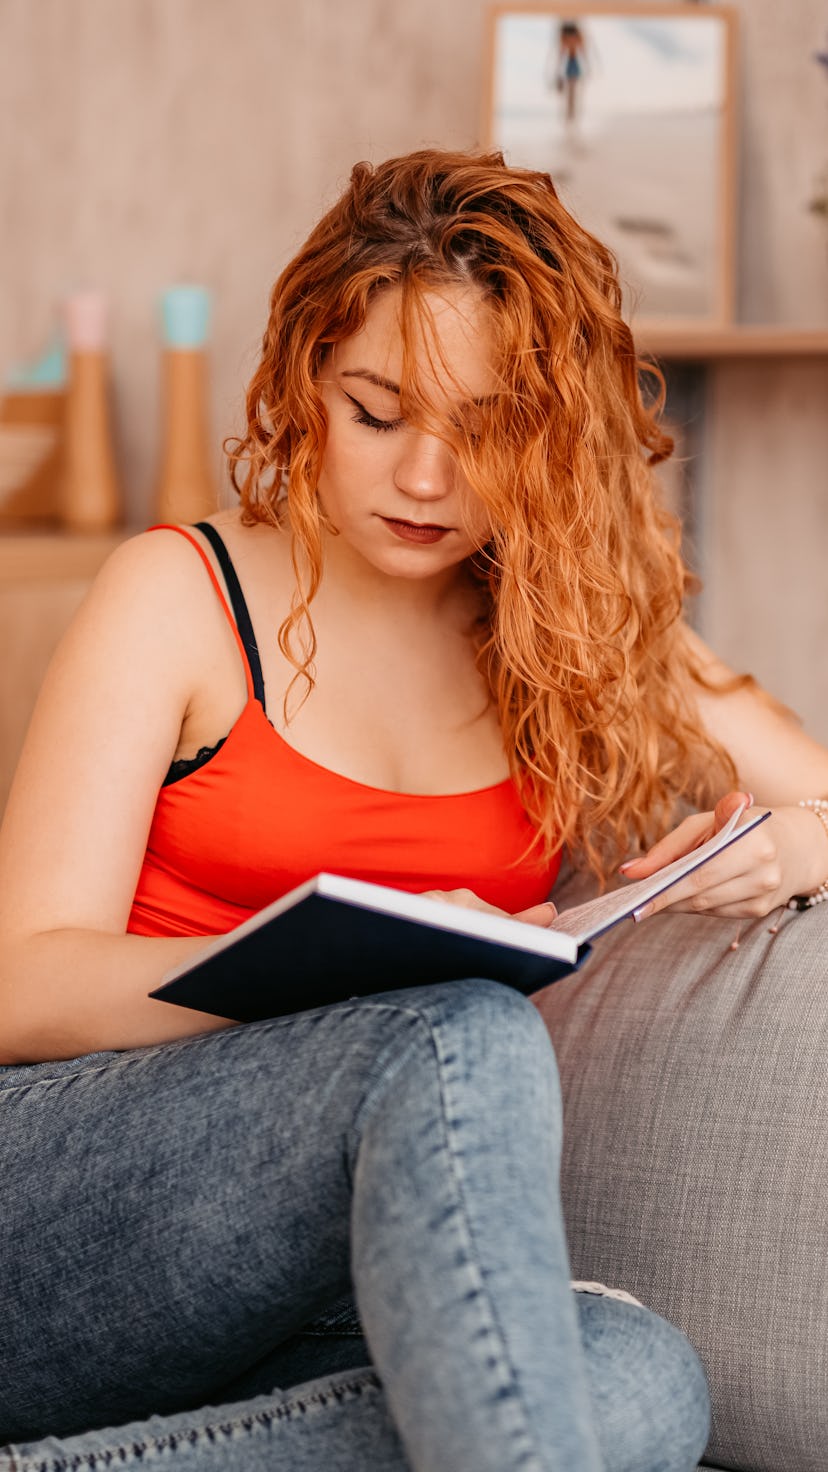 Beautiful young woman At Home sitting On Sofa and Reading Book.